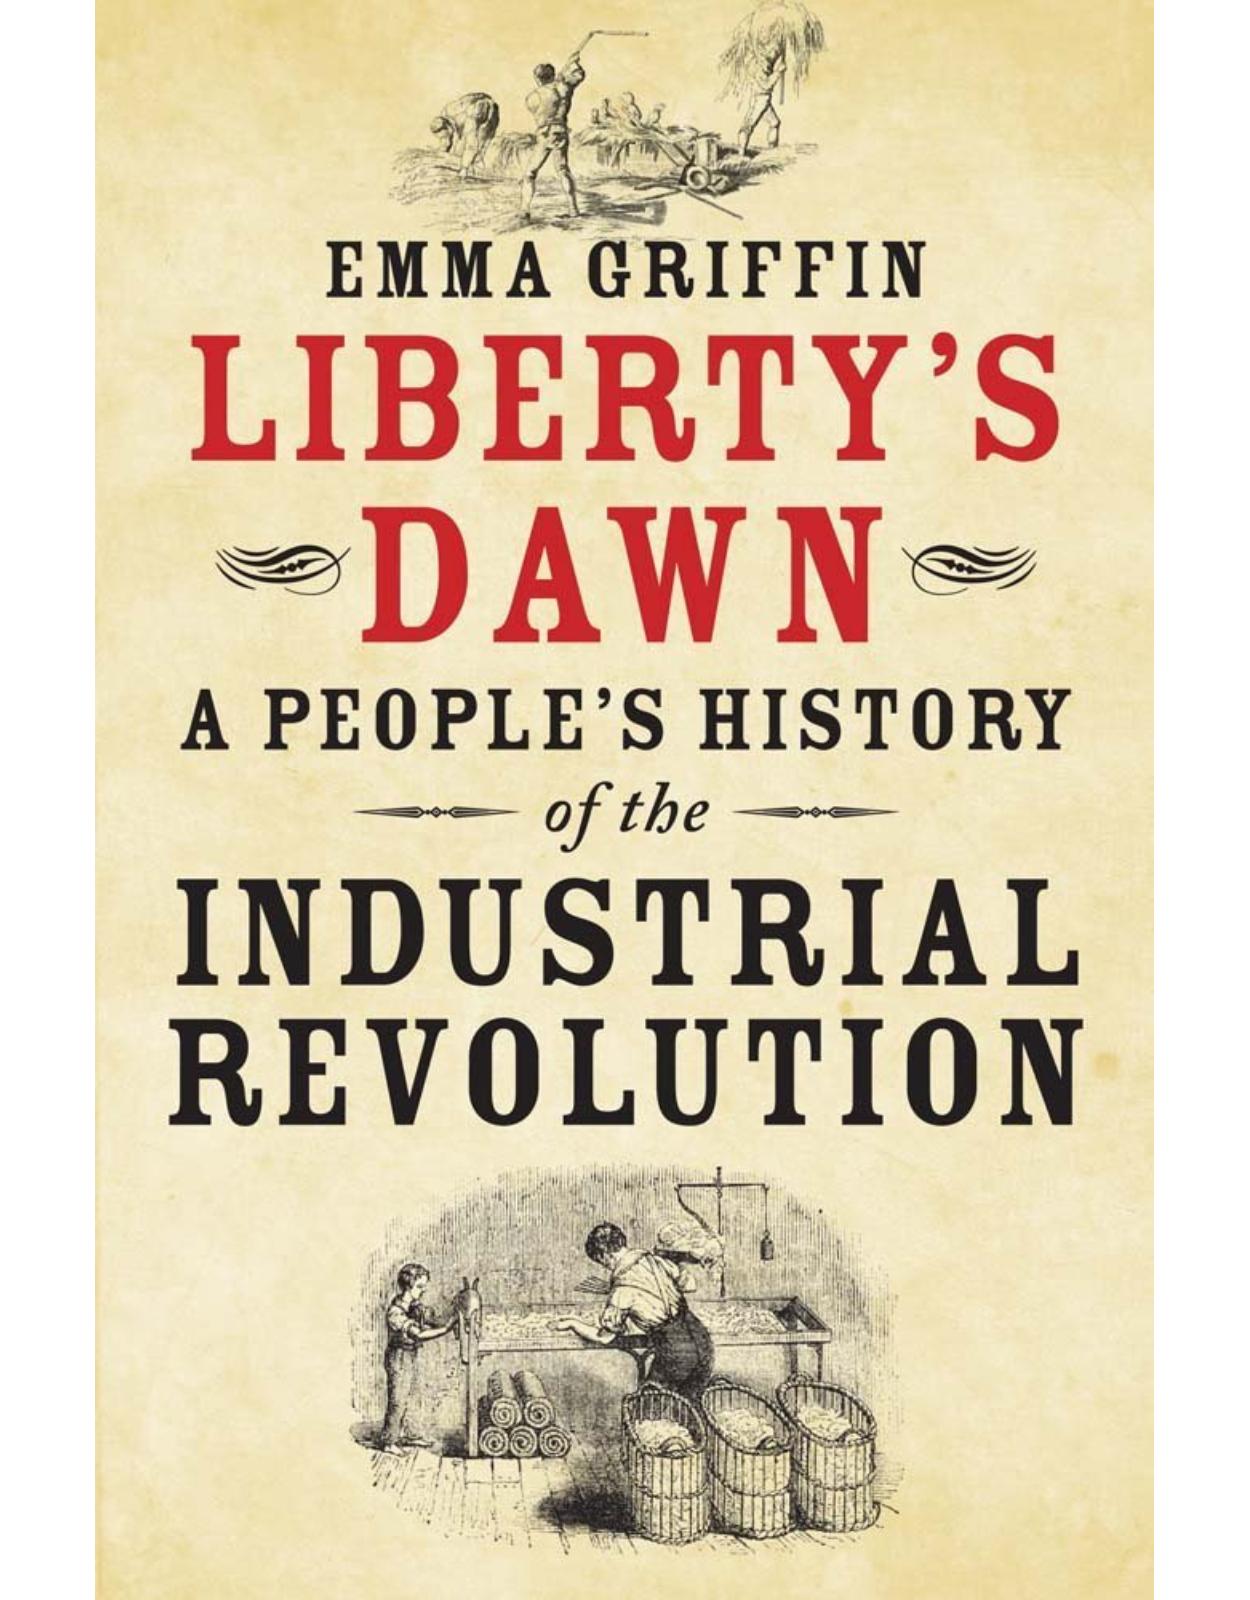 Liberty's Dawn. A People's History of the Industrial Revolution